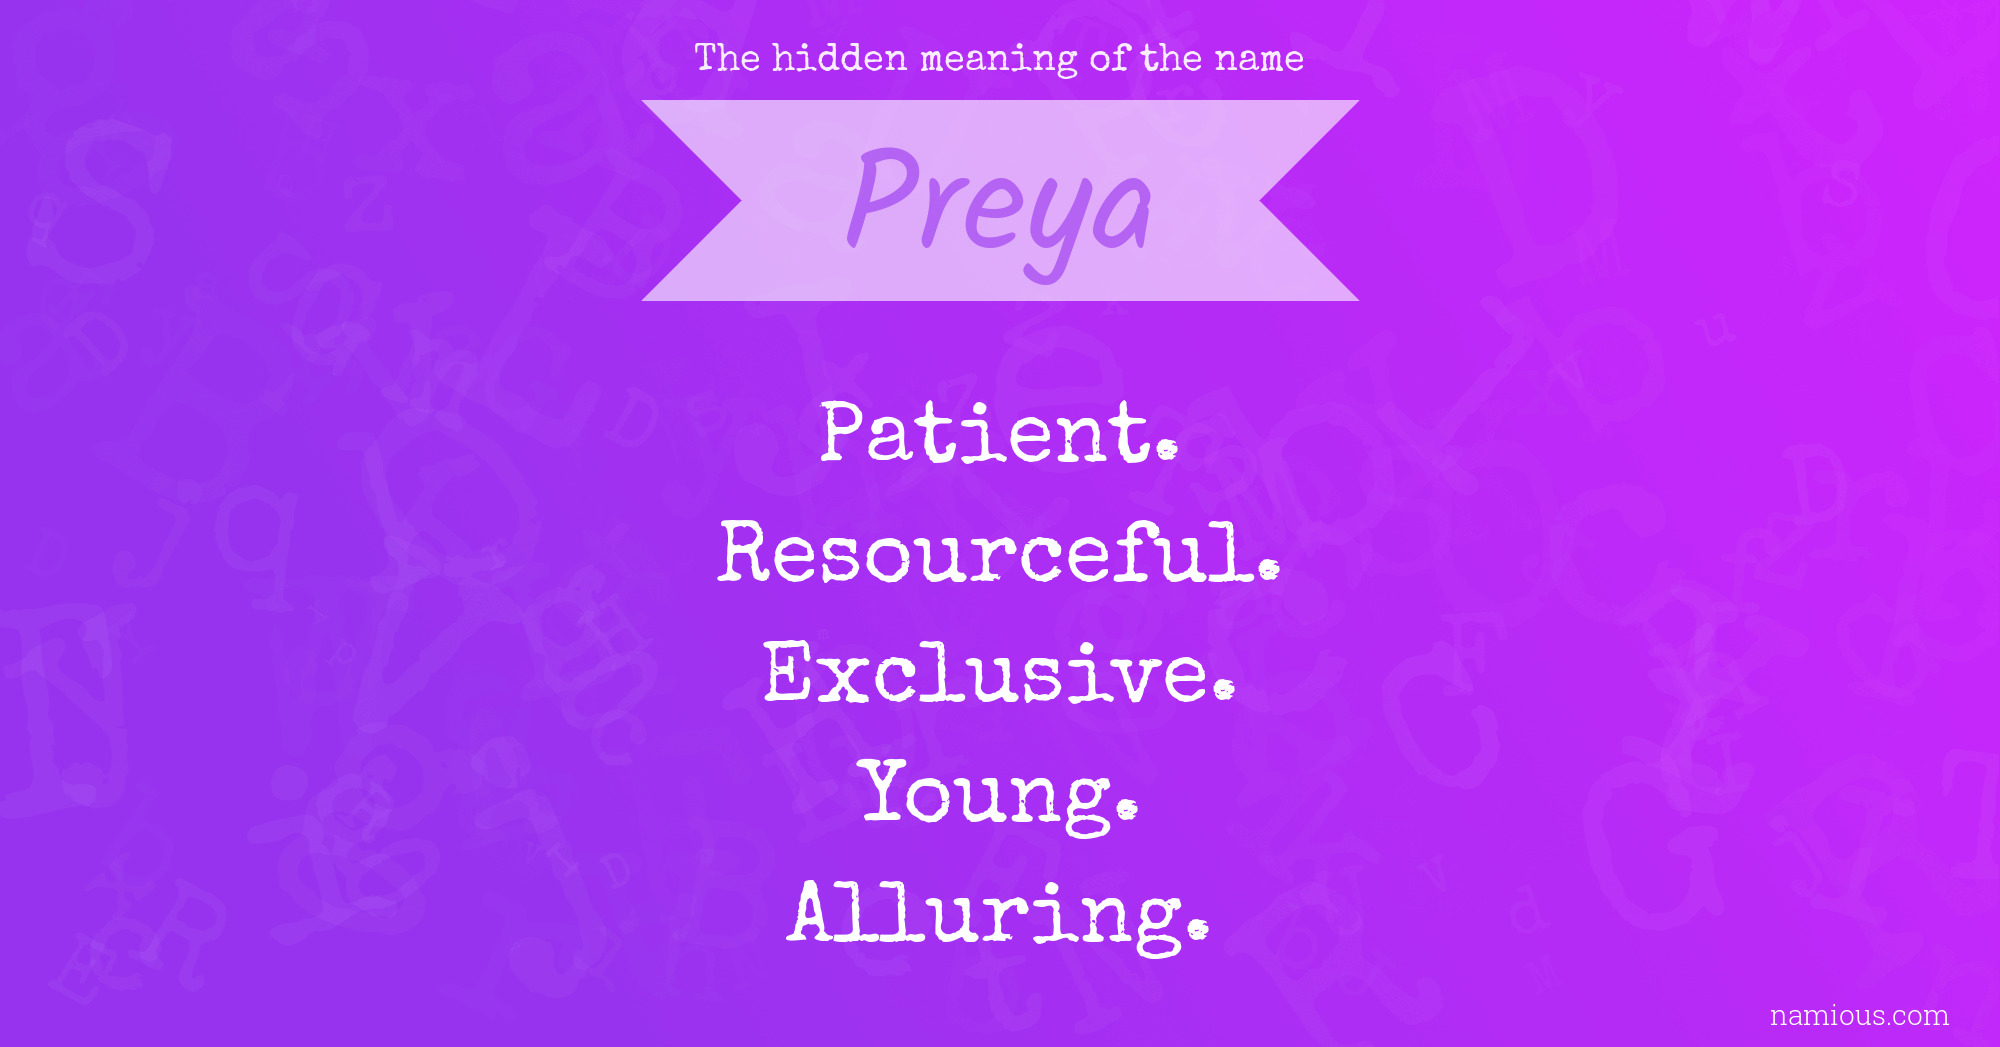 The hidden meaning of the name Preya